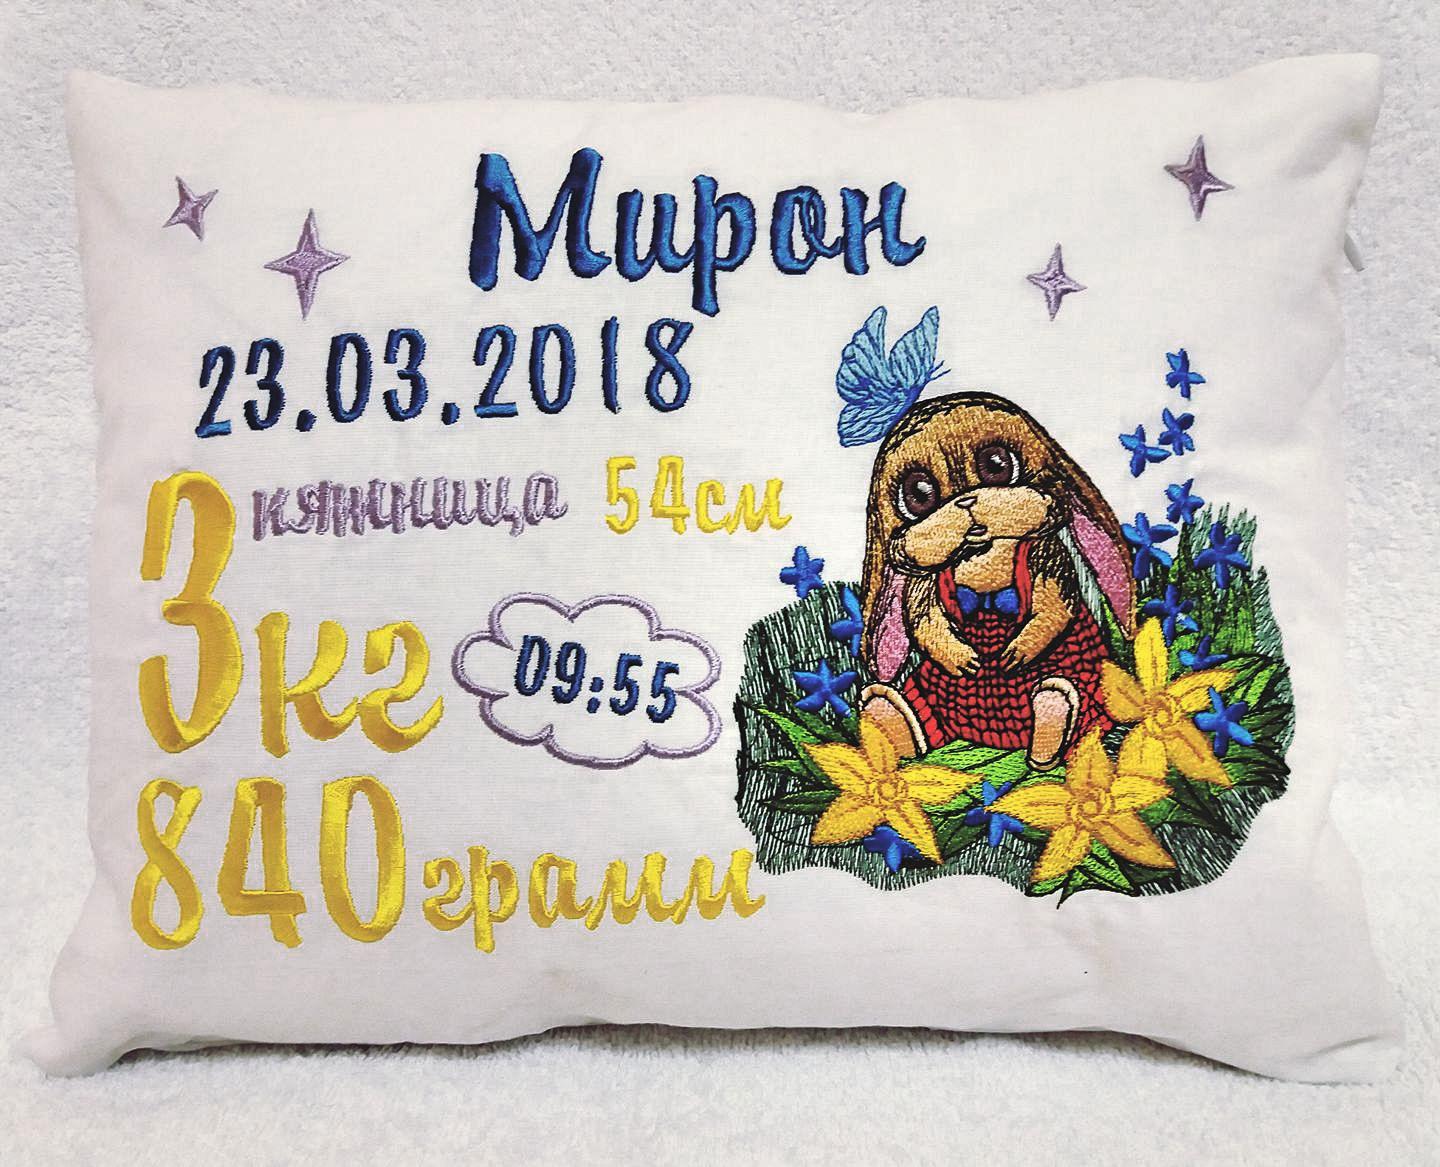 Embroidered cushion with surprised bunny design